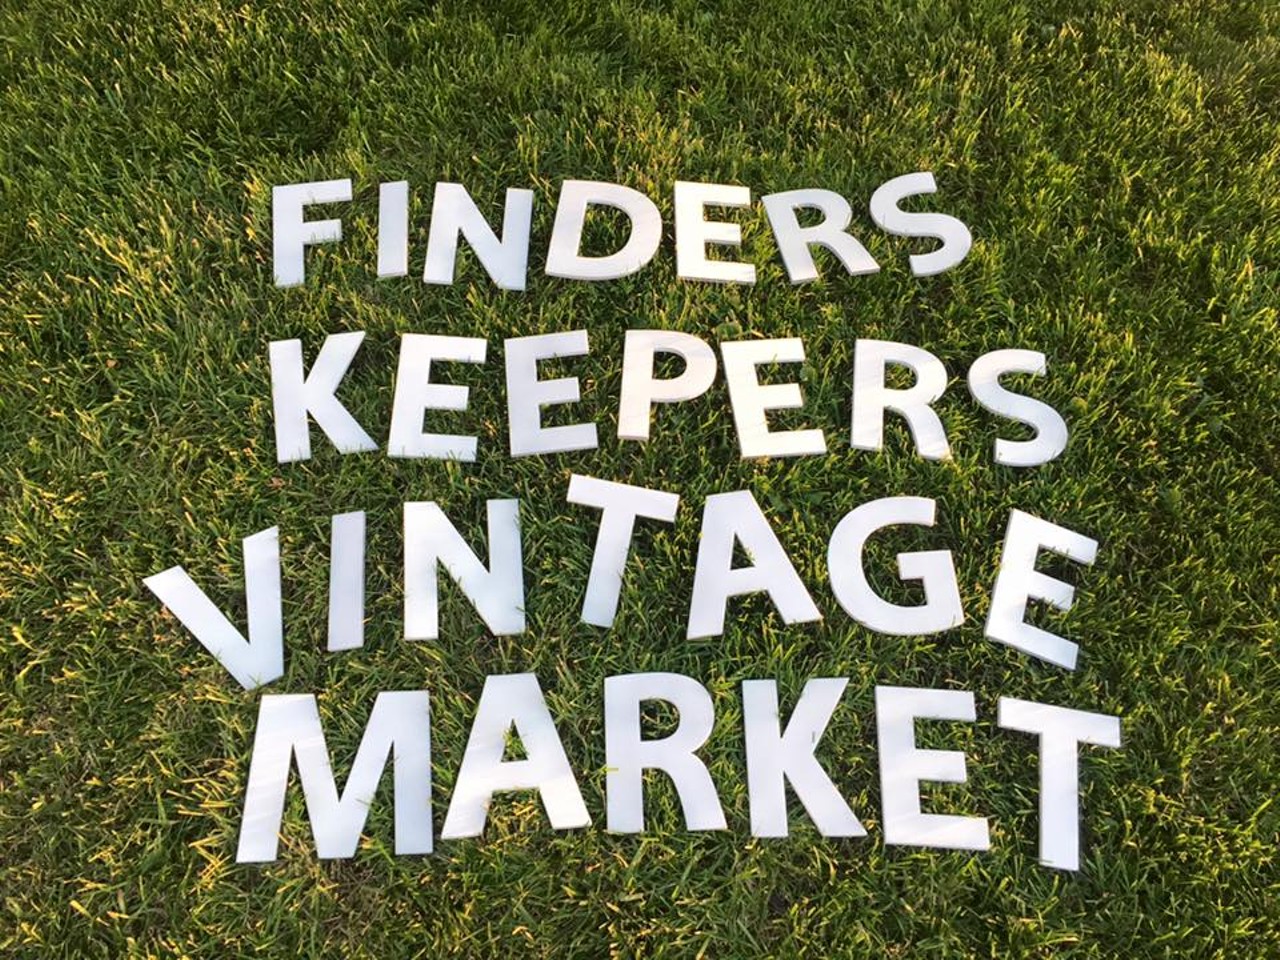 Sunday, June 5 - 
Finders Keepers Vintage Market
@ Woodhaven Civic Center Park - 
If you missed the Vintage Market at Elizabeth Park, here&#146;s your shot at redemption. This outdoor market will feature all the chippy paint, upcycle furniture, vintage decor, homemade jewelry, clothing, and rustic finds you can handle. It&#146;s going to be like your Pinterest page just came to life. 
Runs from 10 a.m. to 5 p.m.; 23101 Hall Rd., Trenton; finderskeepersvintagemarket.com; entry is free. Photo via Facebook.